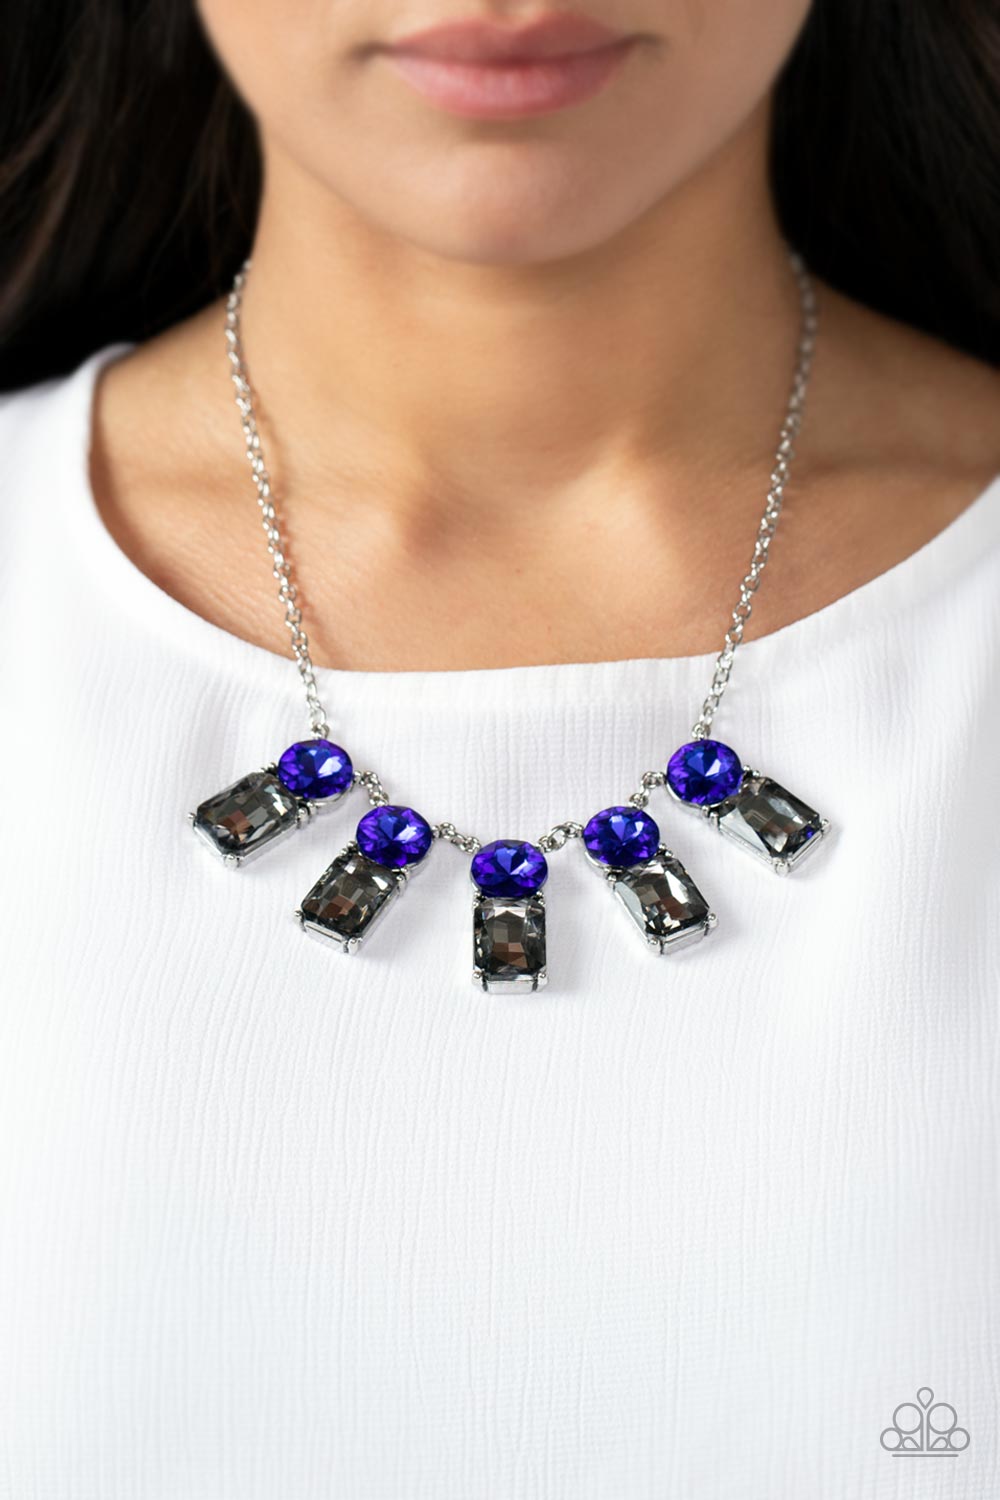 Paparazzi Accessories Celestial Royal - Blue A sparkly row of oversized blue gems regally sit atop emerald cut smoky rhinestone bases as they delicately link along a dainty silver chain below the collar, resulting in a royal glamorous centerpiece. Feature